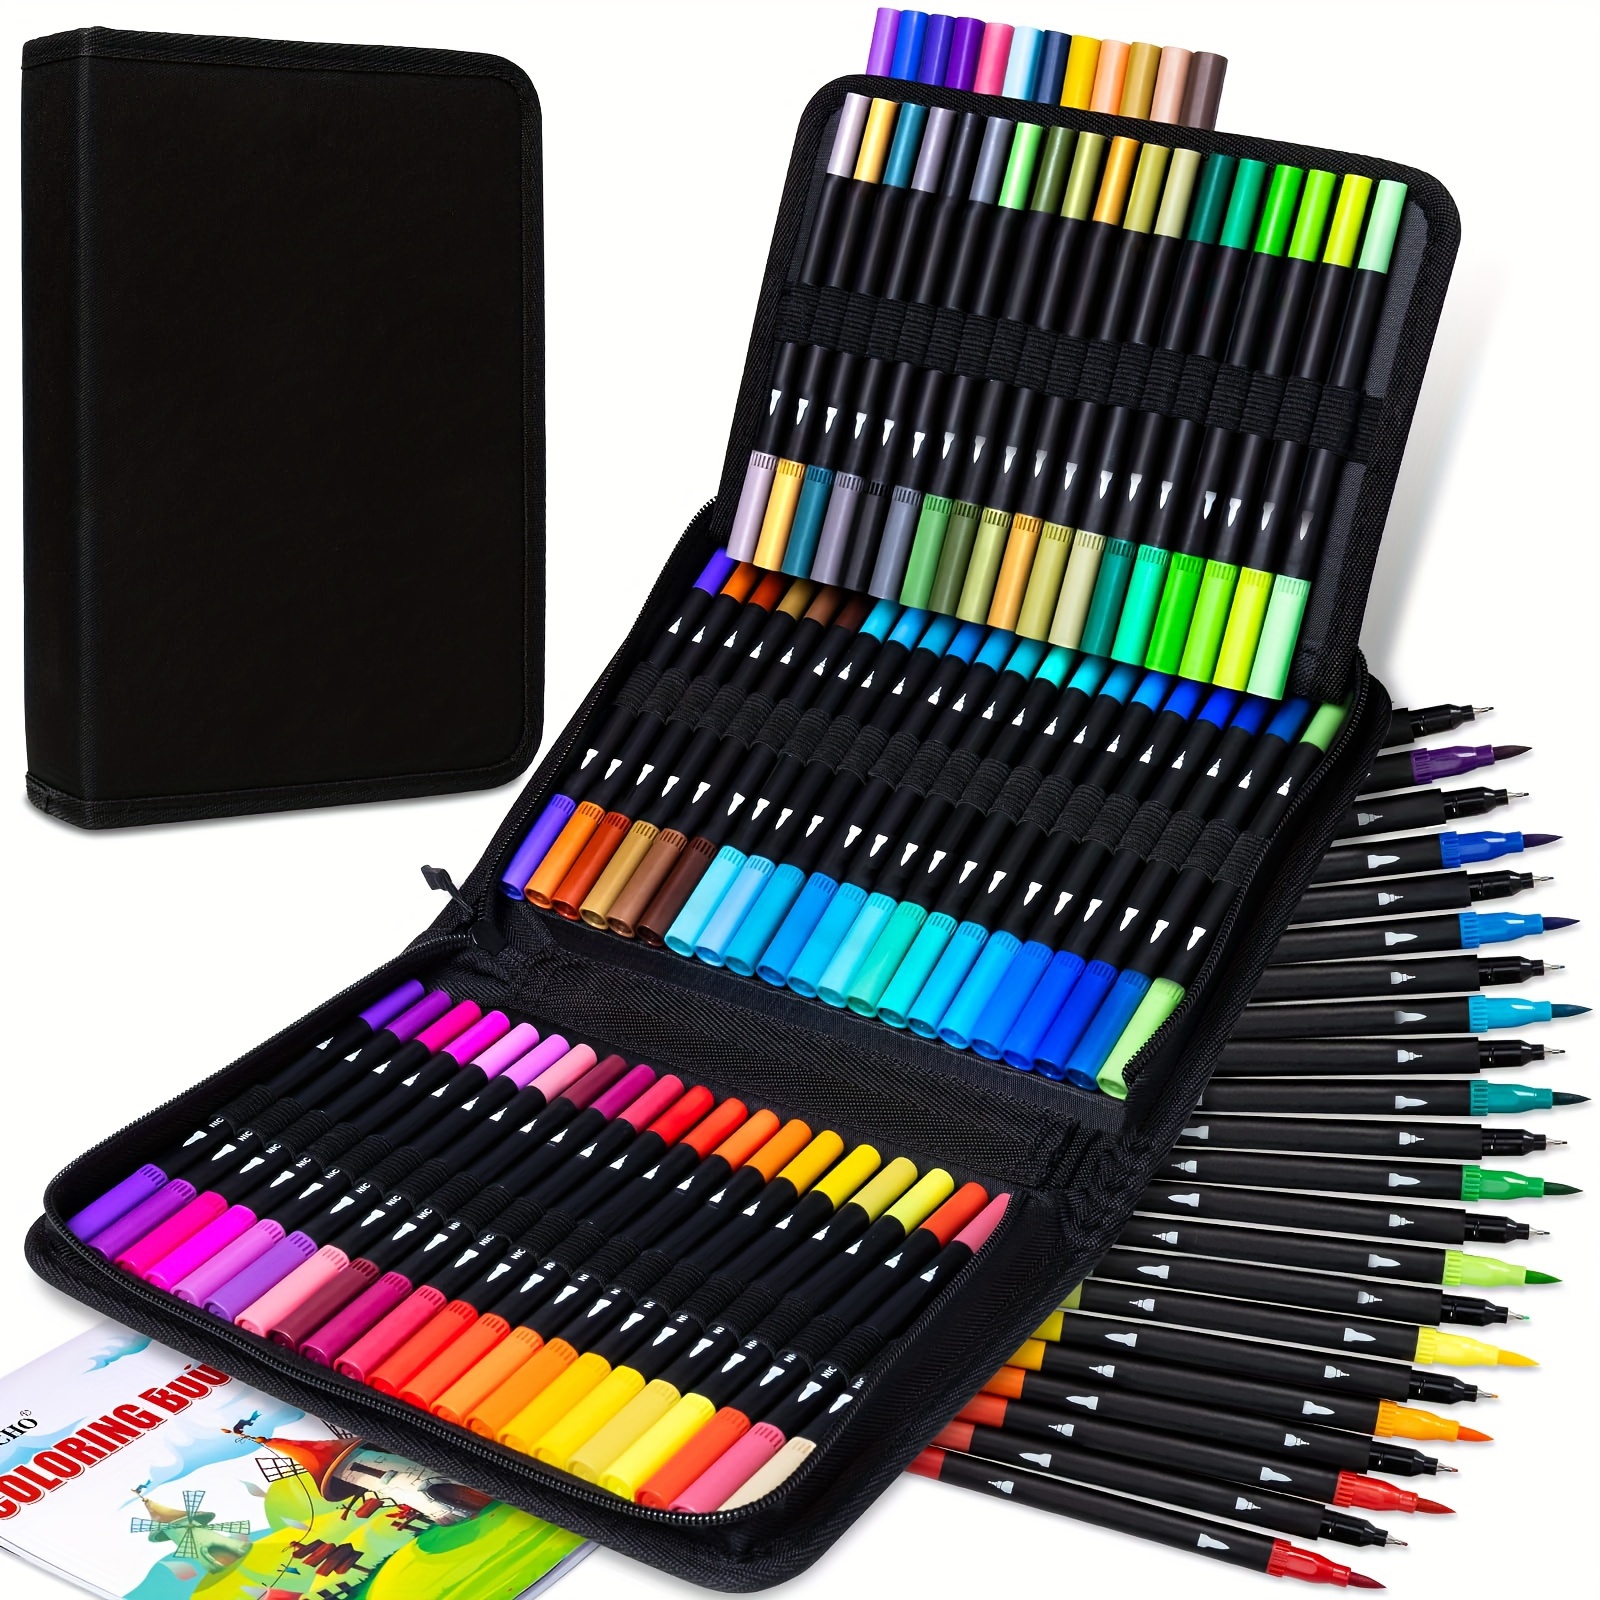 

120 Colored Dual Brush Markers For Adult Coloring Books, Journal Planner Pens Dual Tip Marker For Supplies Bullet Journaling Note Taking Drawing